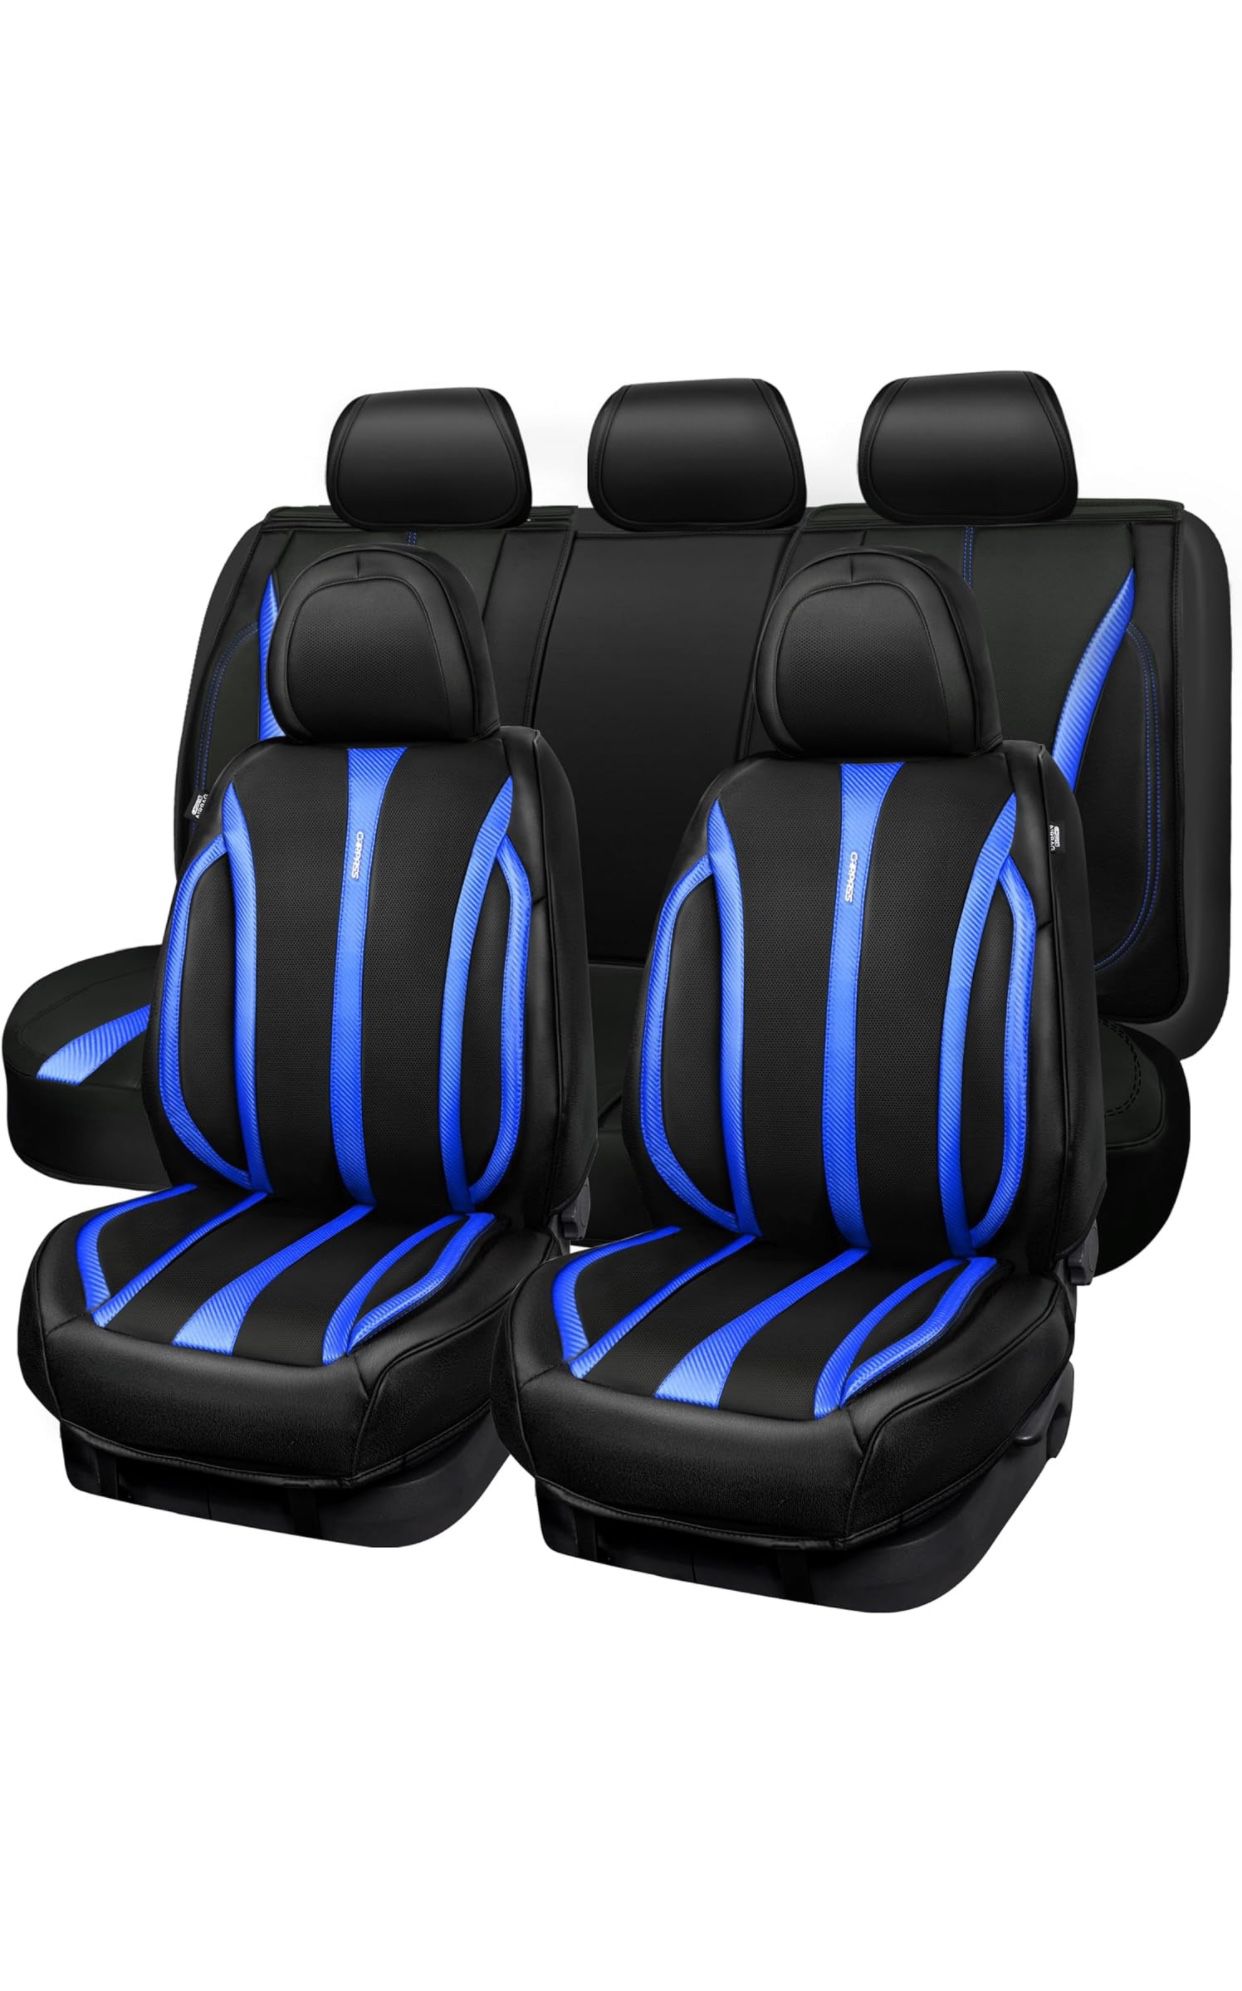 CAR PASS Leather Car Seat Covers,